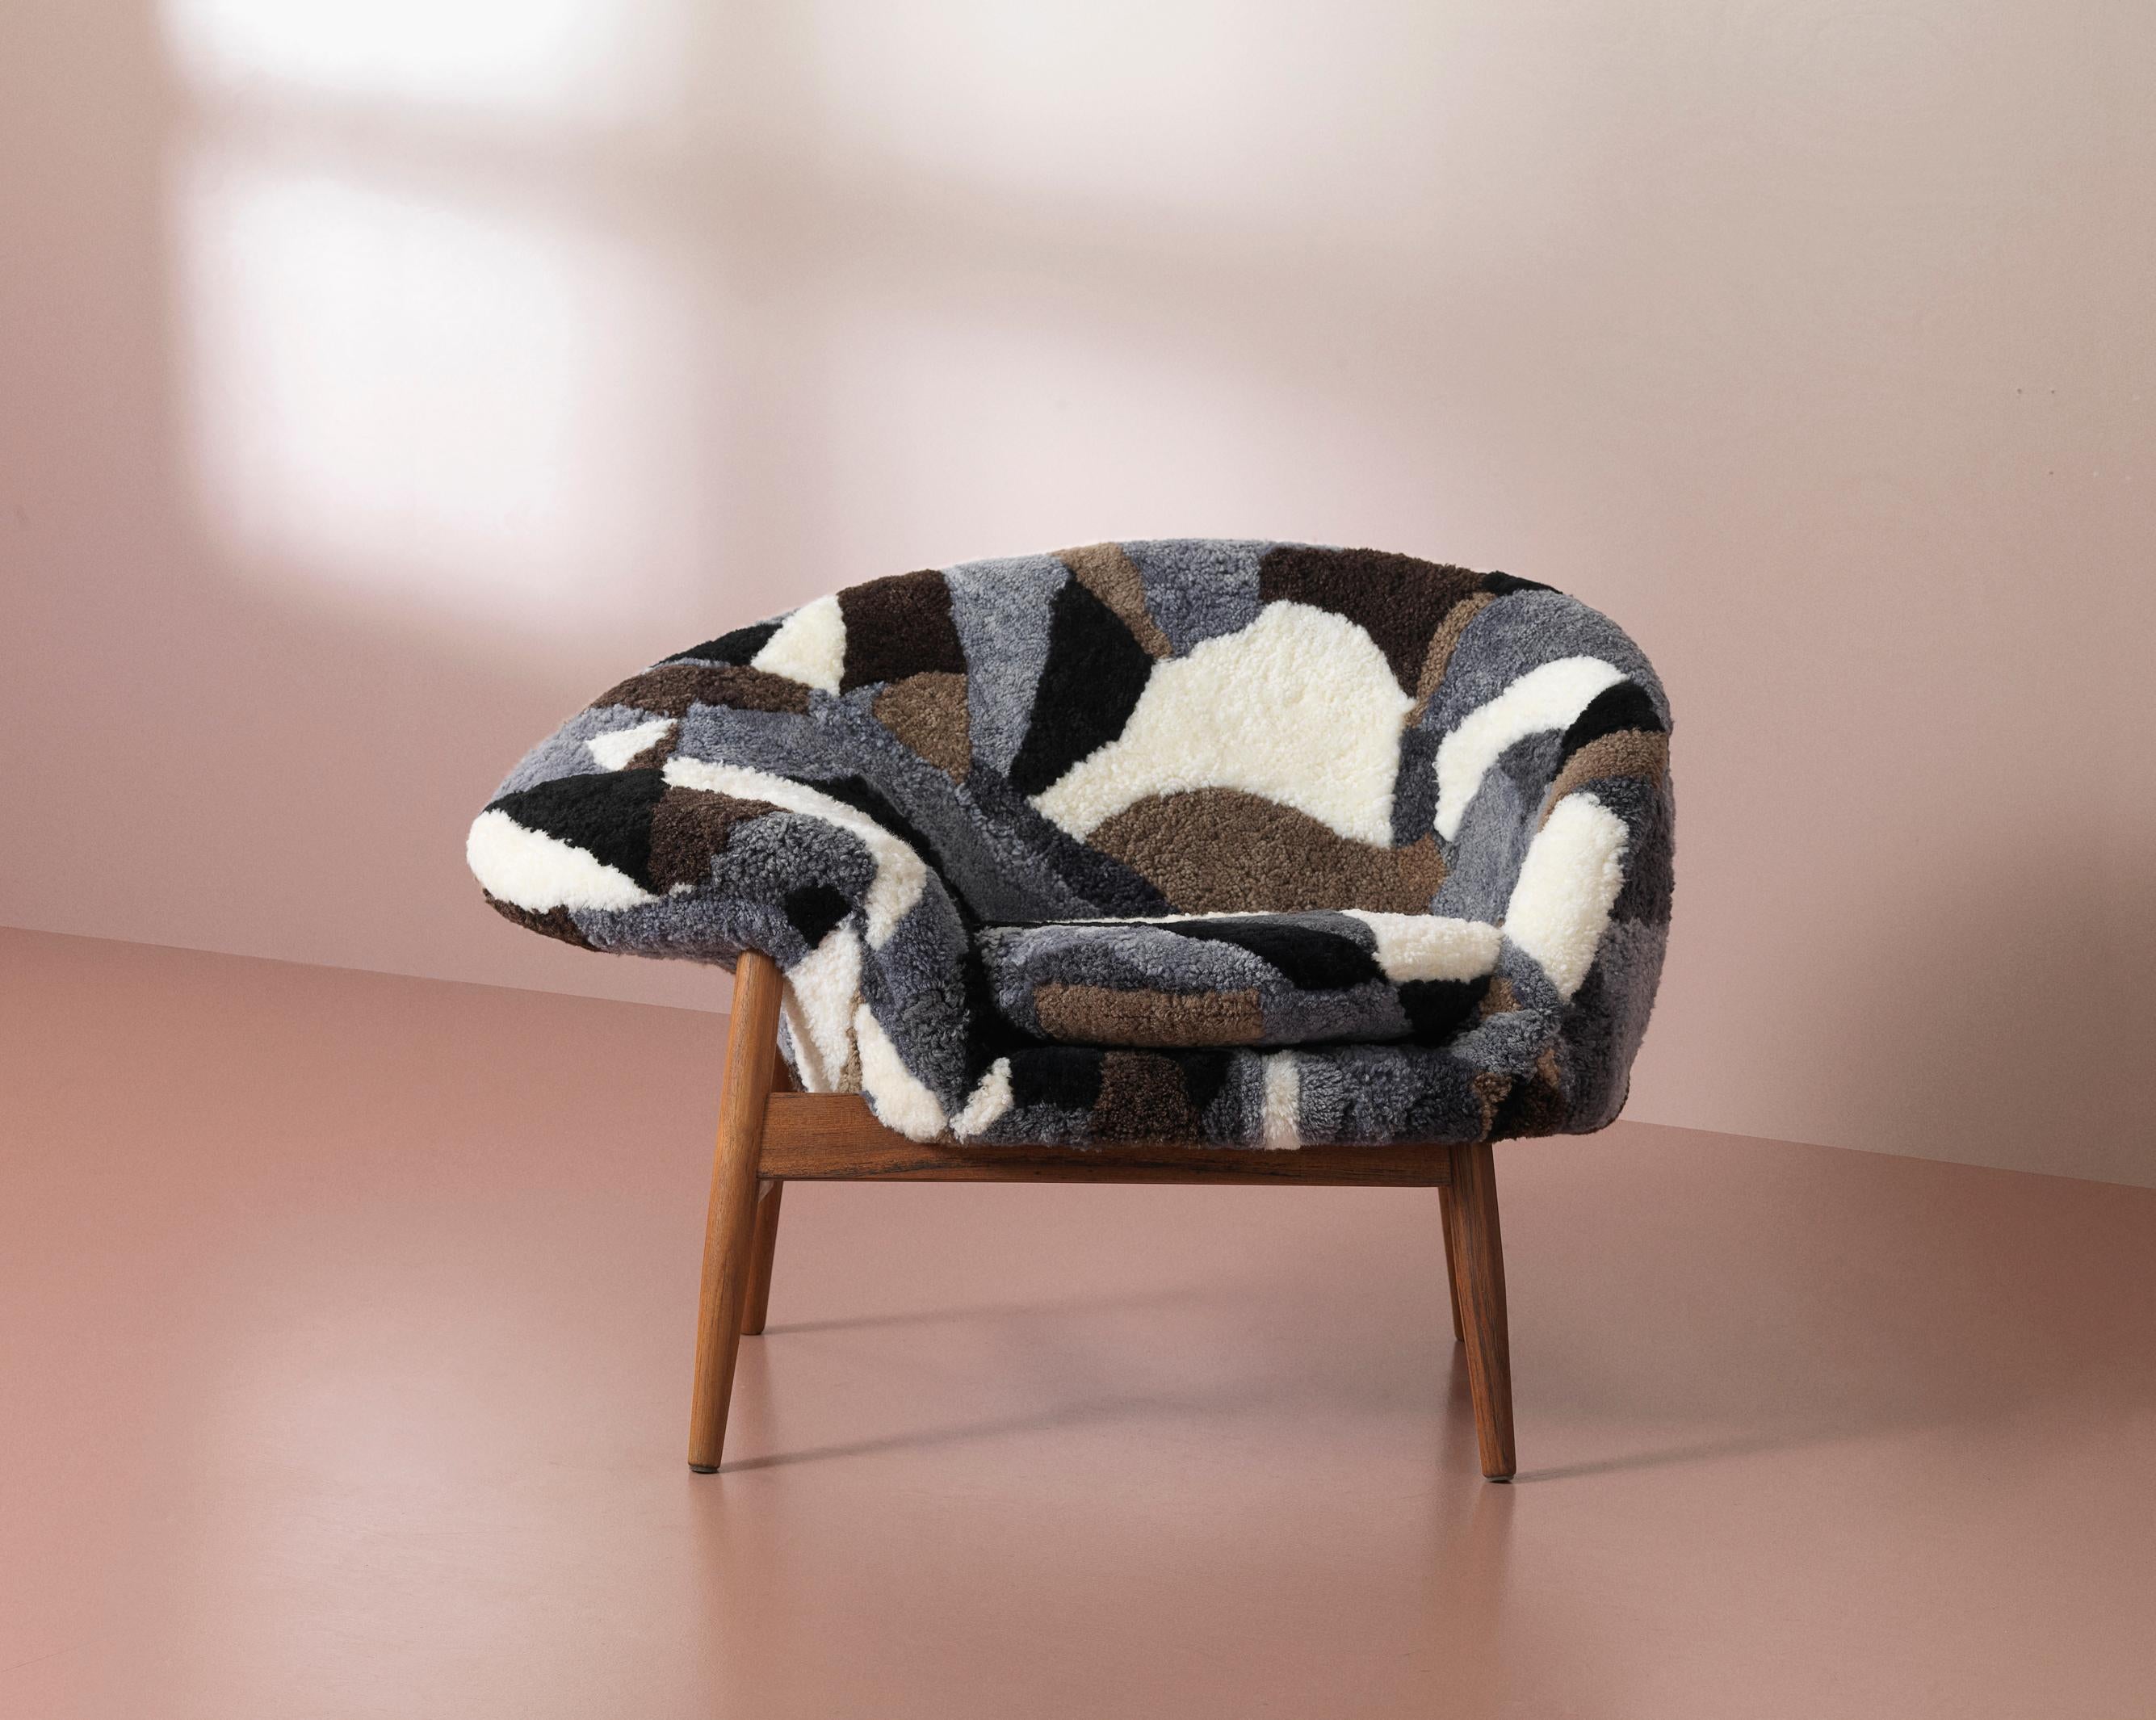 Fried Egg Chair Sheep Chair, by Hans Olsen from Warm Nordic In New Condition For Sale In Viby J, DK